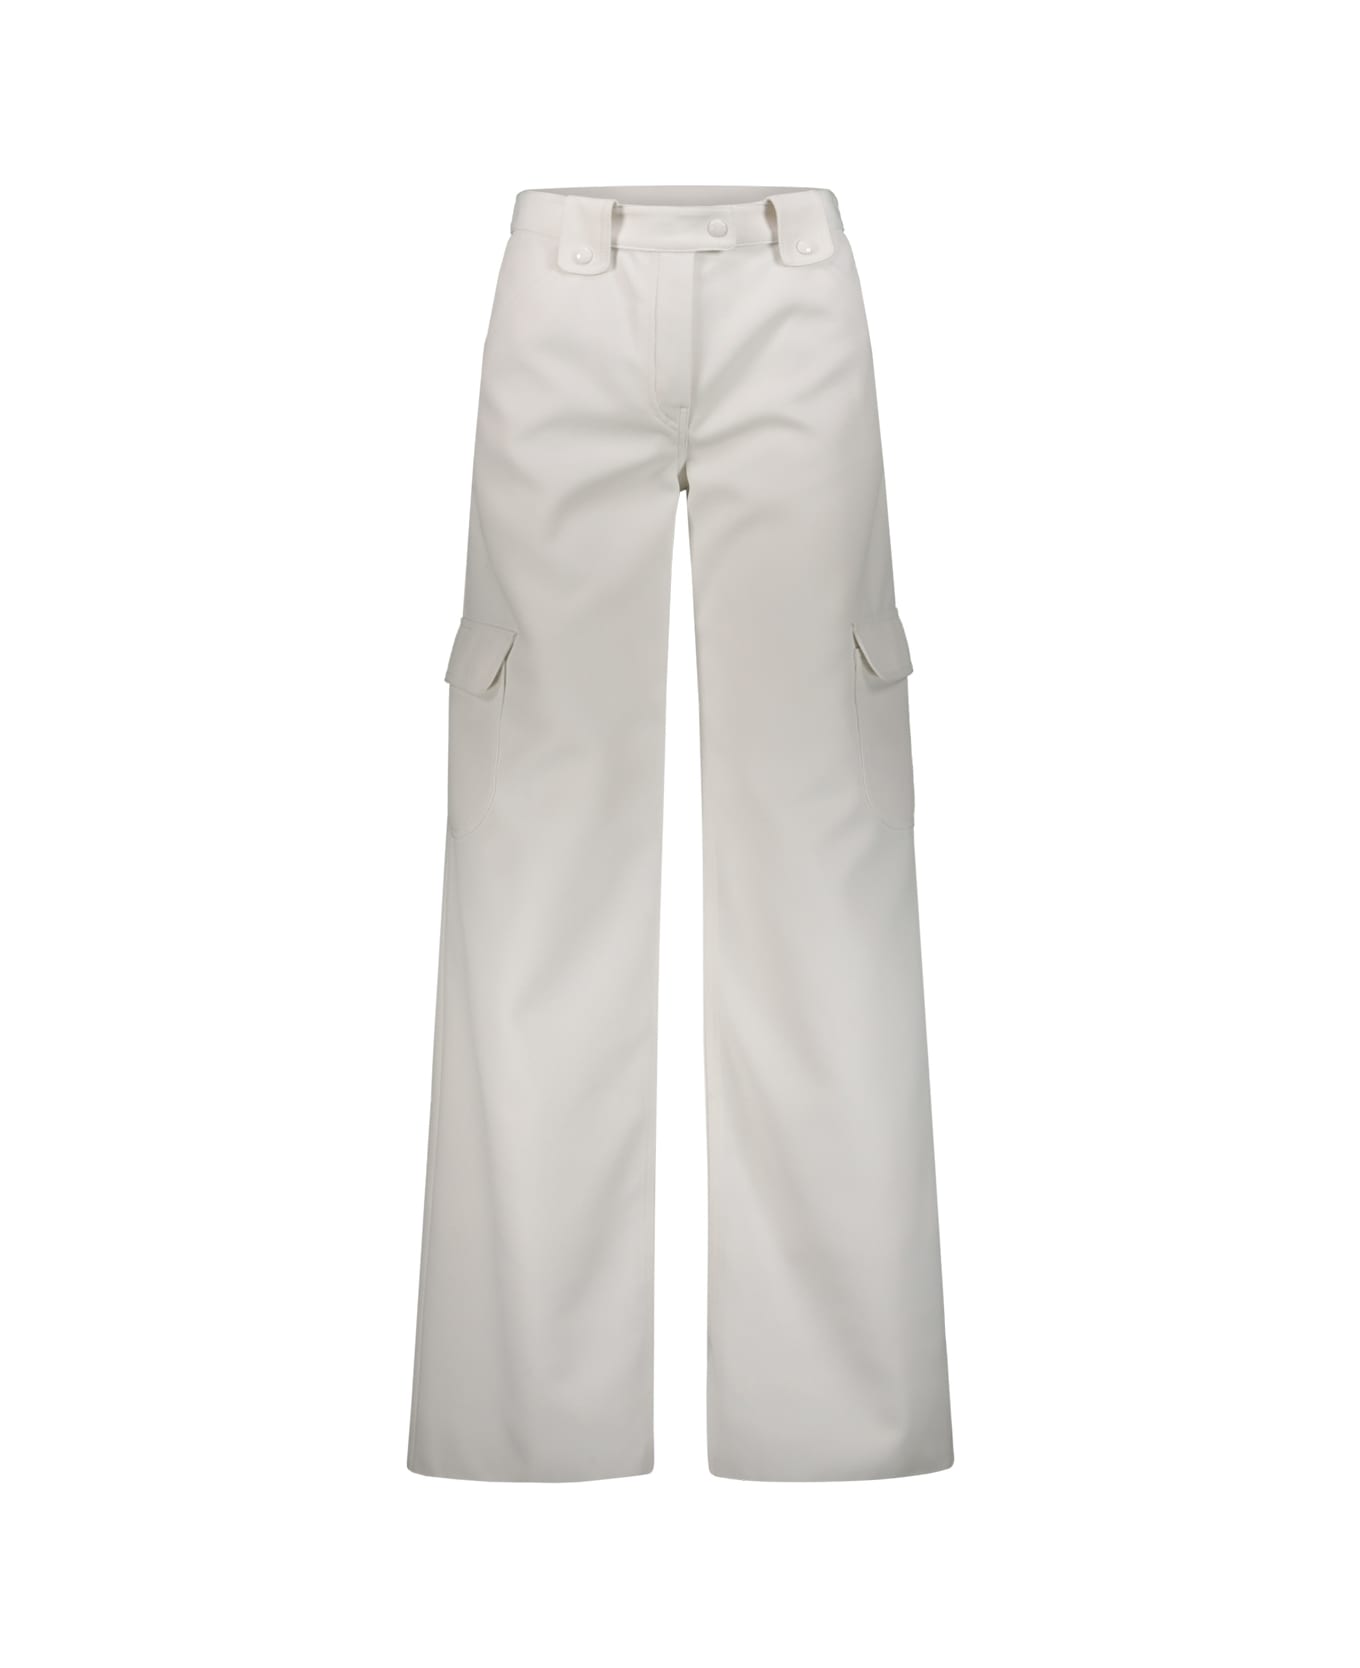 Courrèges Baggy Twill Pants ボトムス